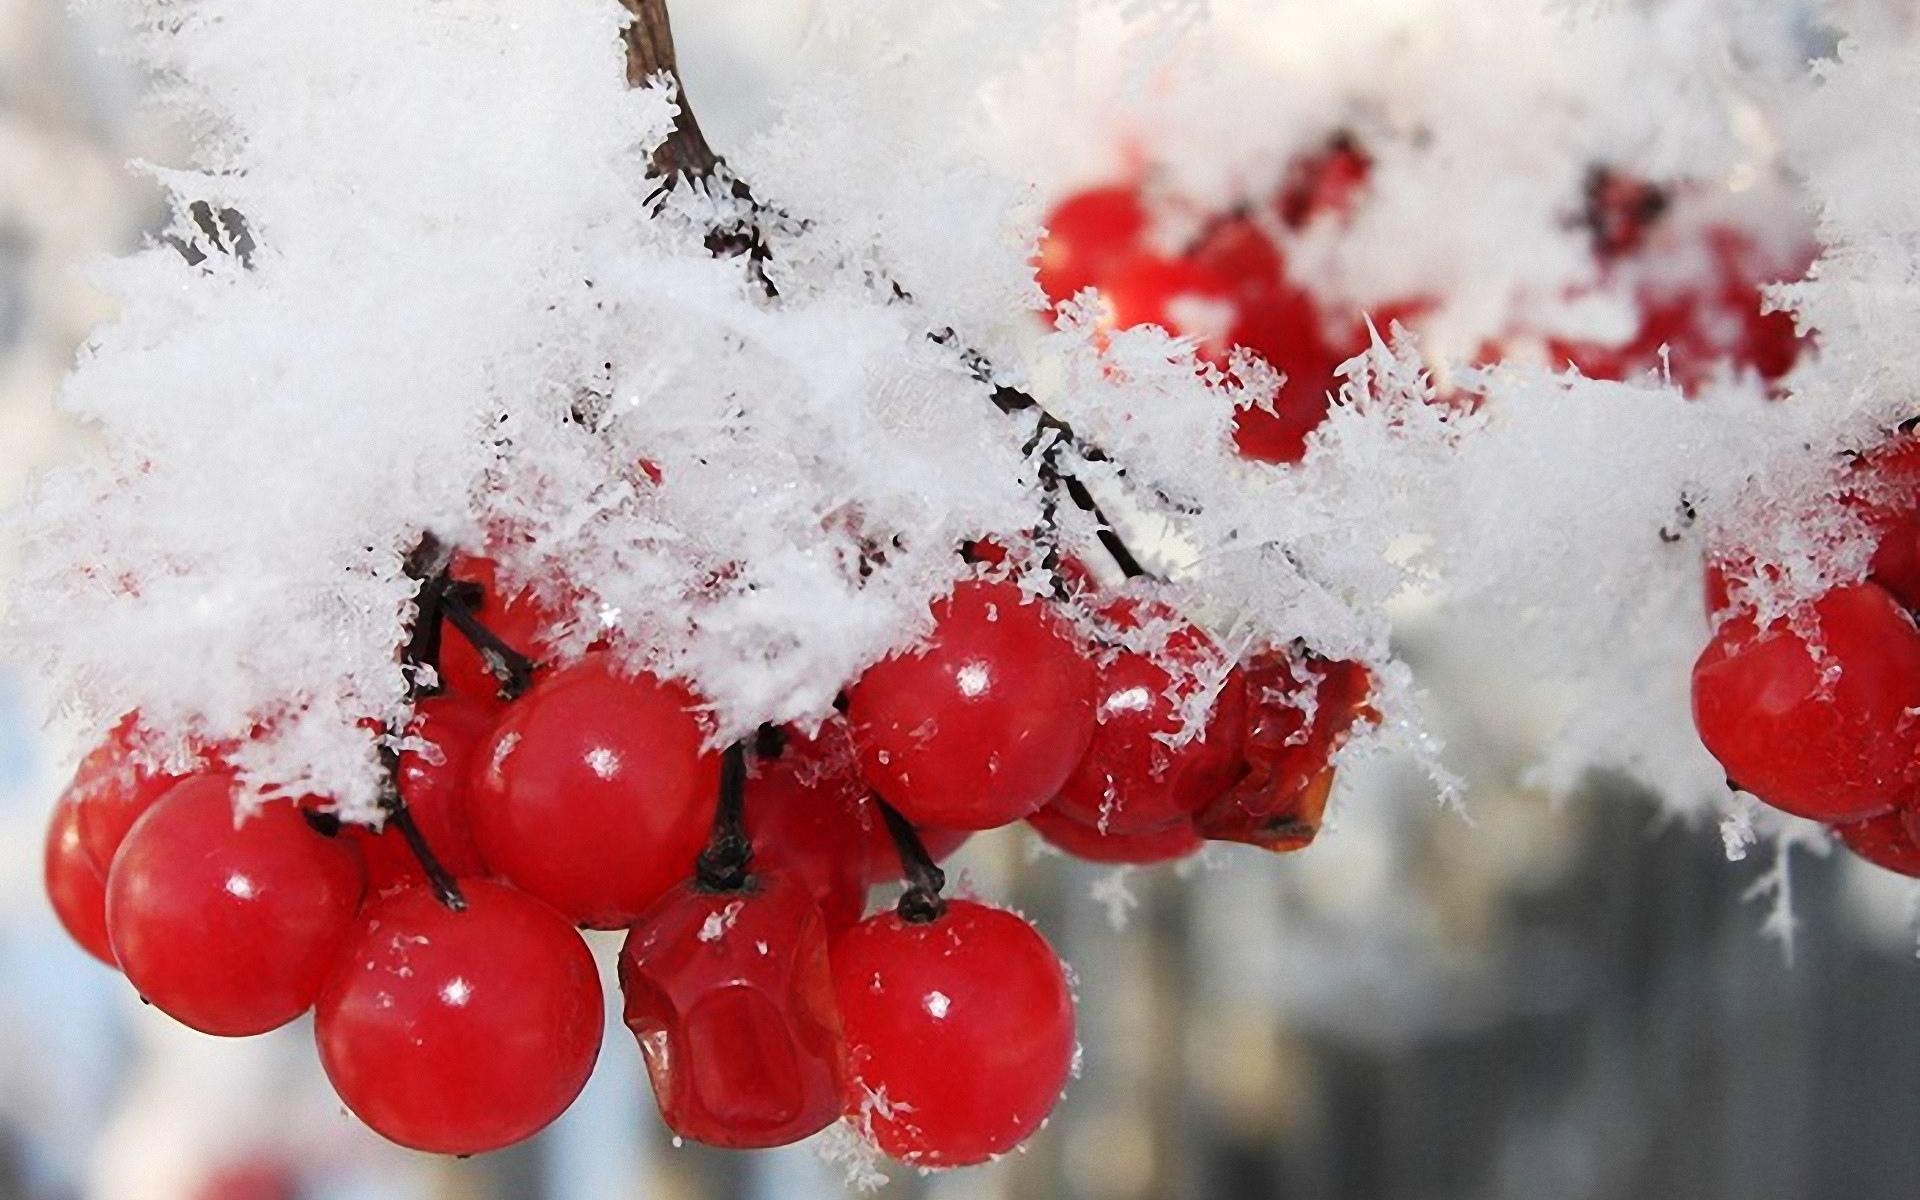 nature, Winter, First, Snow, Red, Berries, Fruits, Cranberry